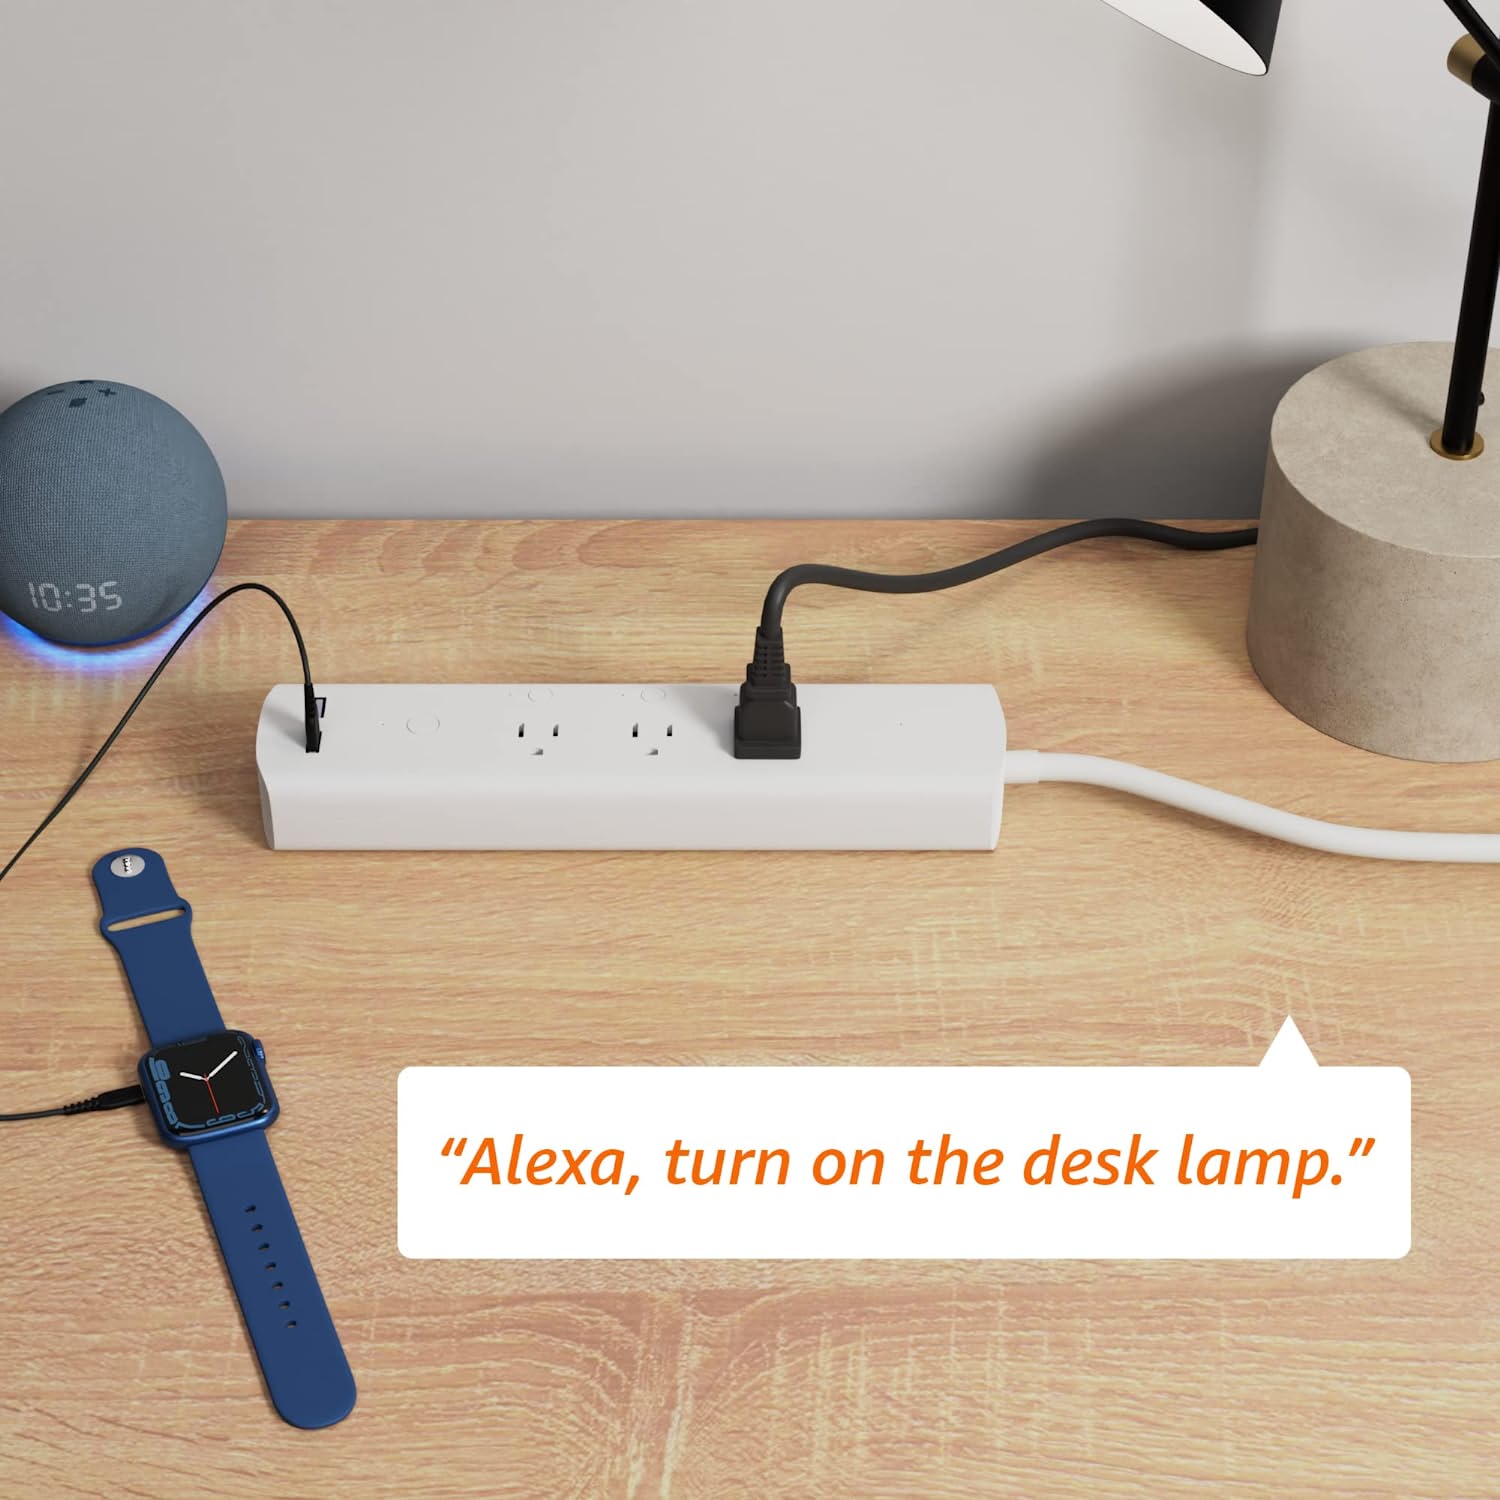 Save 20% on this smart power strip in the Prime Early Access Sale